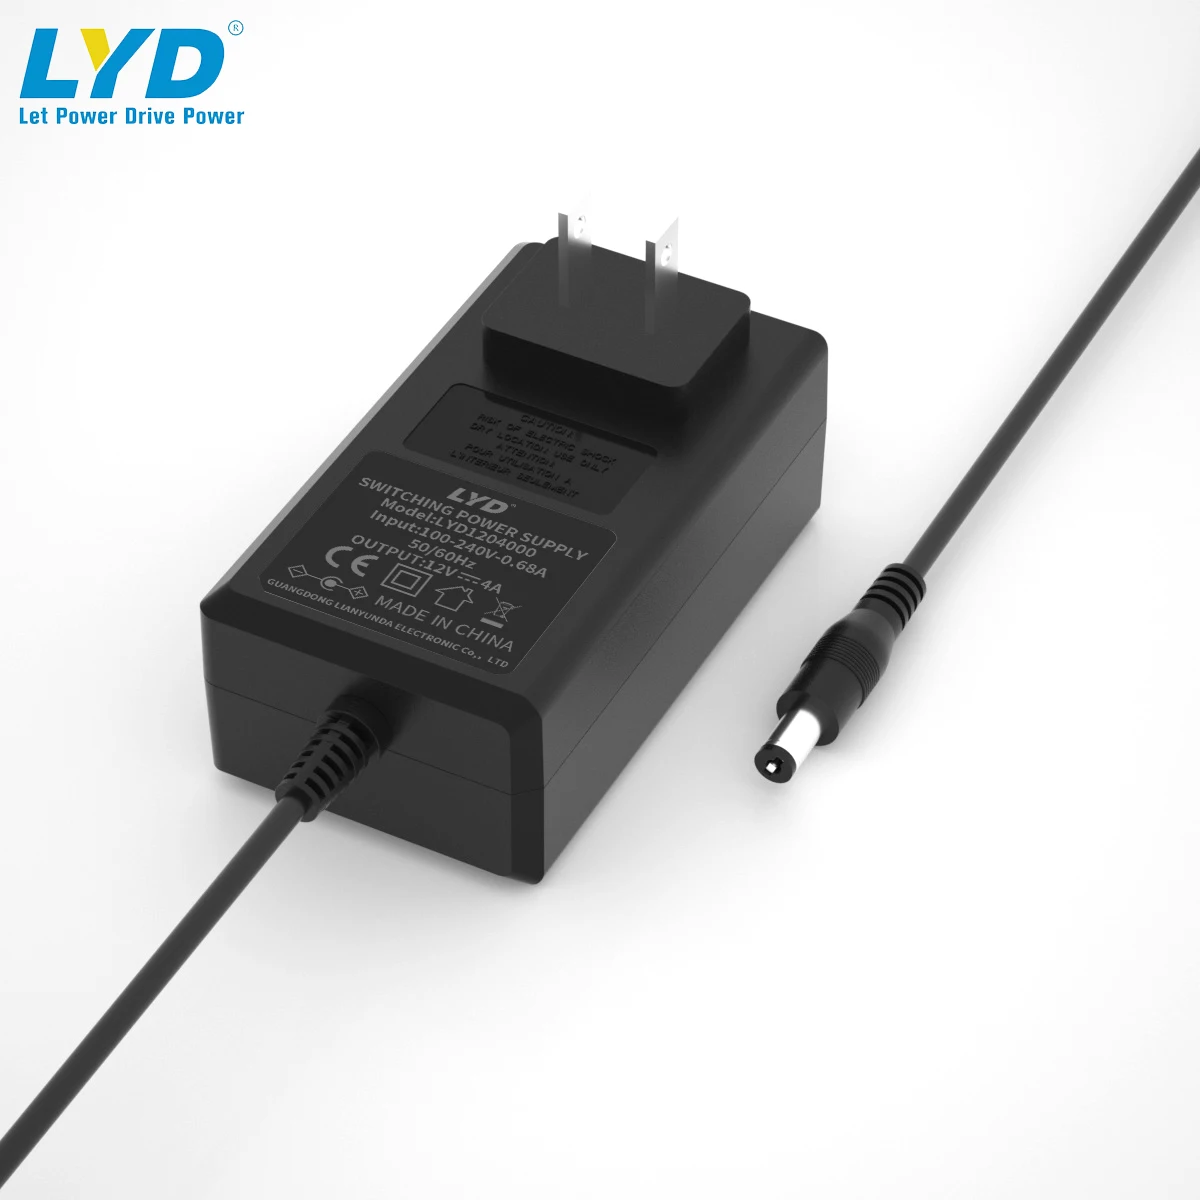 12V 1.5A Sunny UL Certified AC/DC Power Supply Adapter for Security Camera 